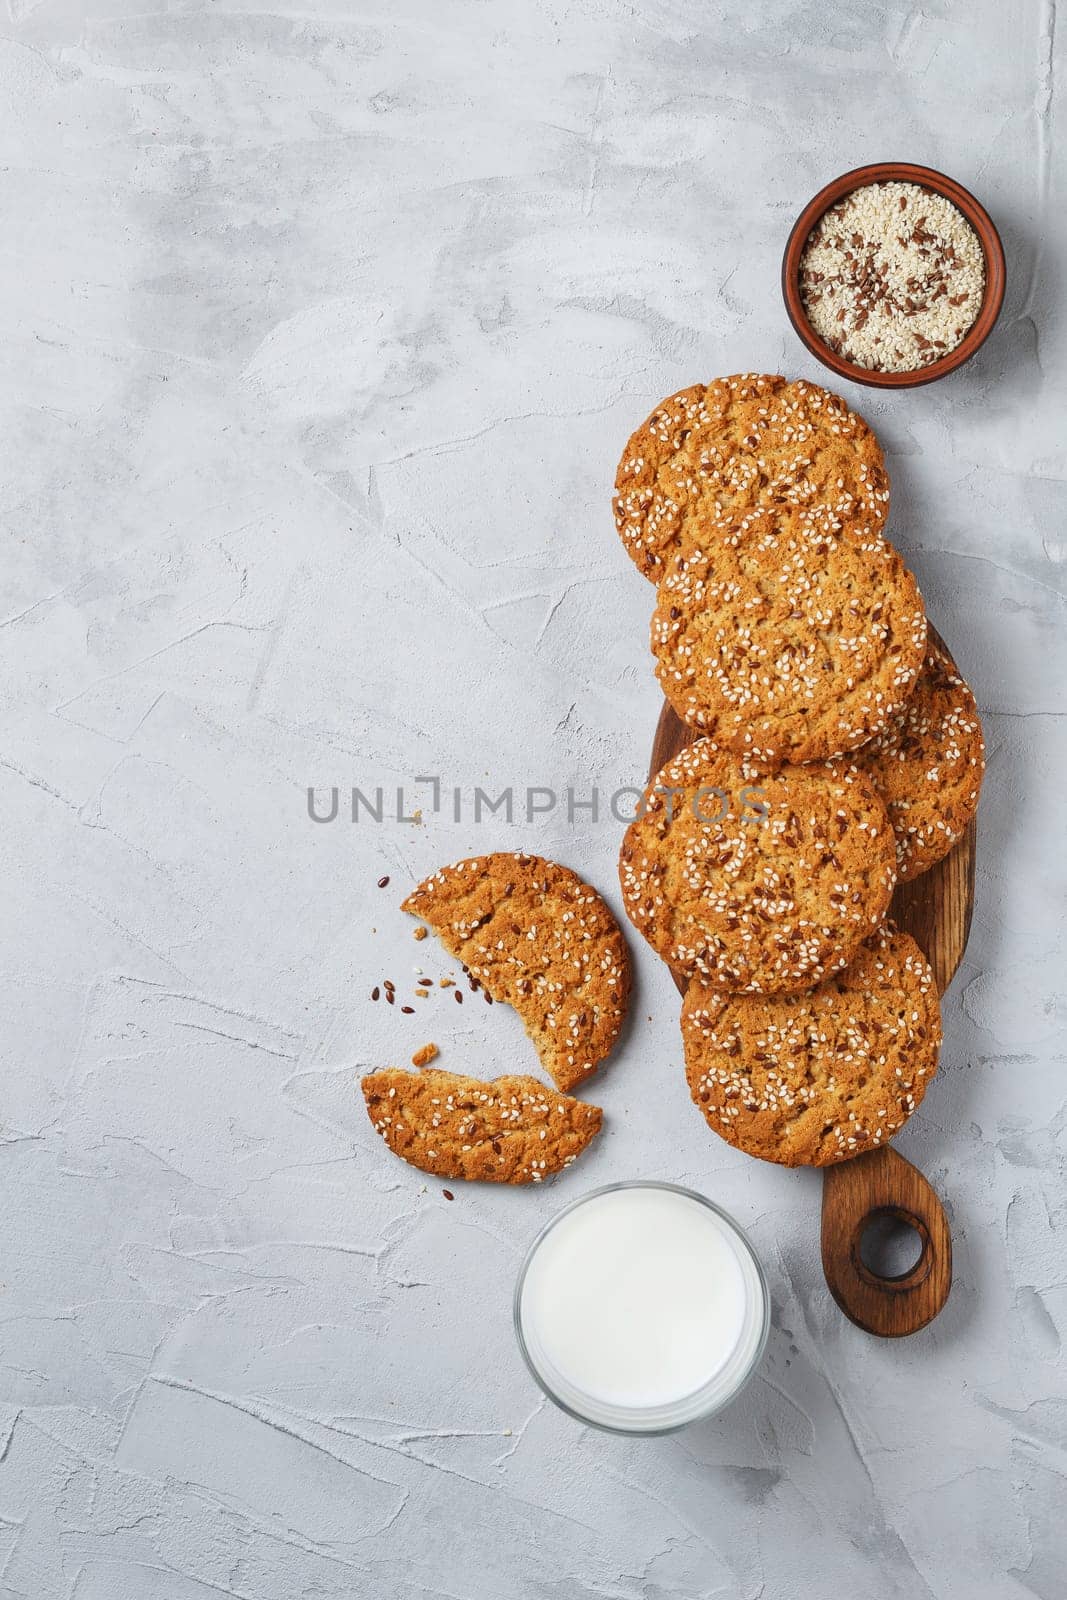 Oatmeal cookies with sesame seeds and flax seeds on a gray background with a jar of oatmeal and a glass of milk.Copy space by lara29